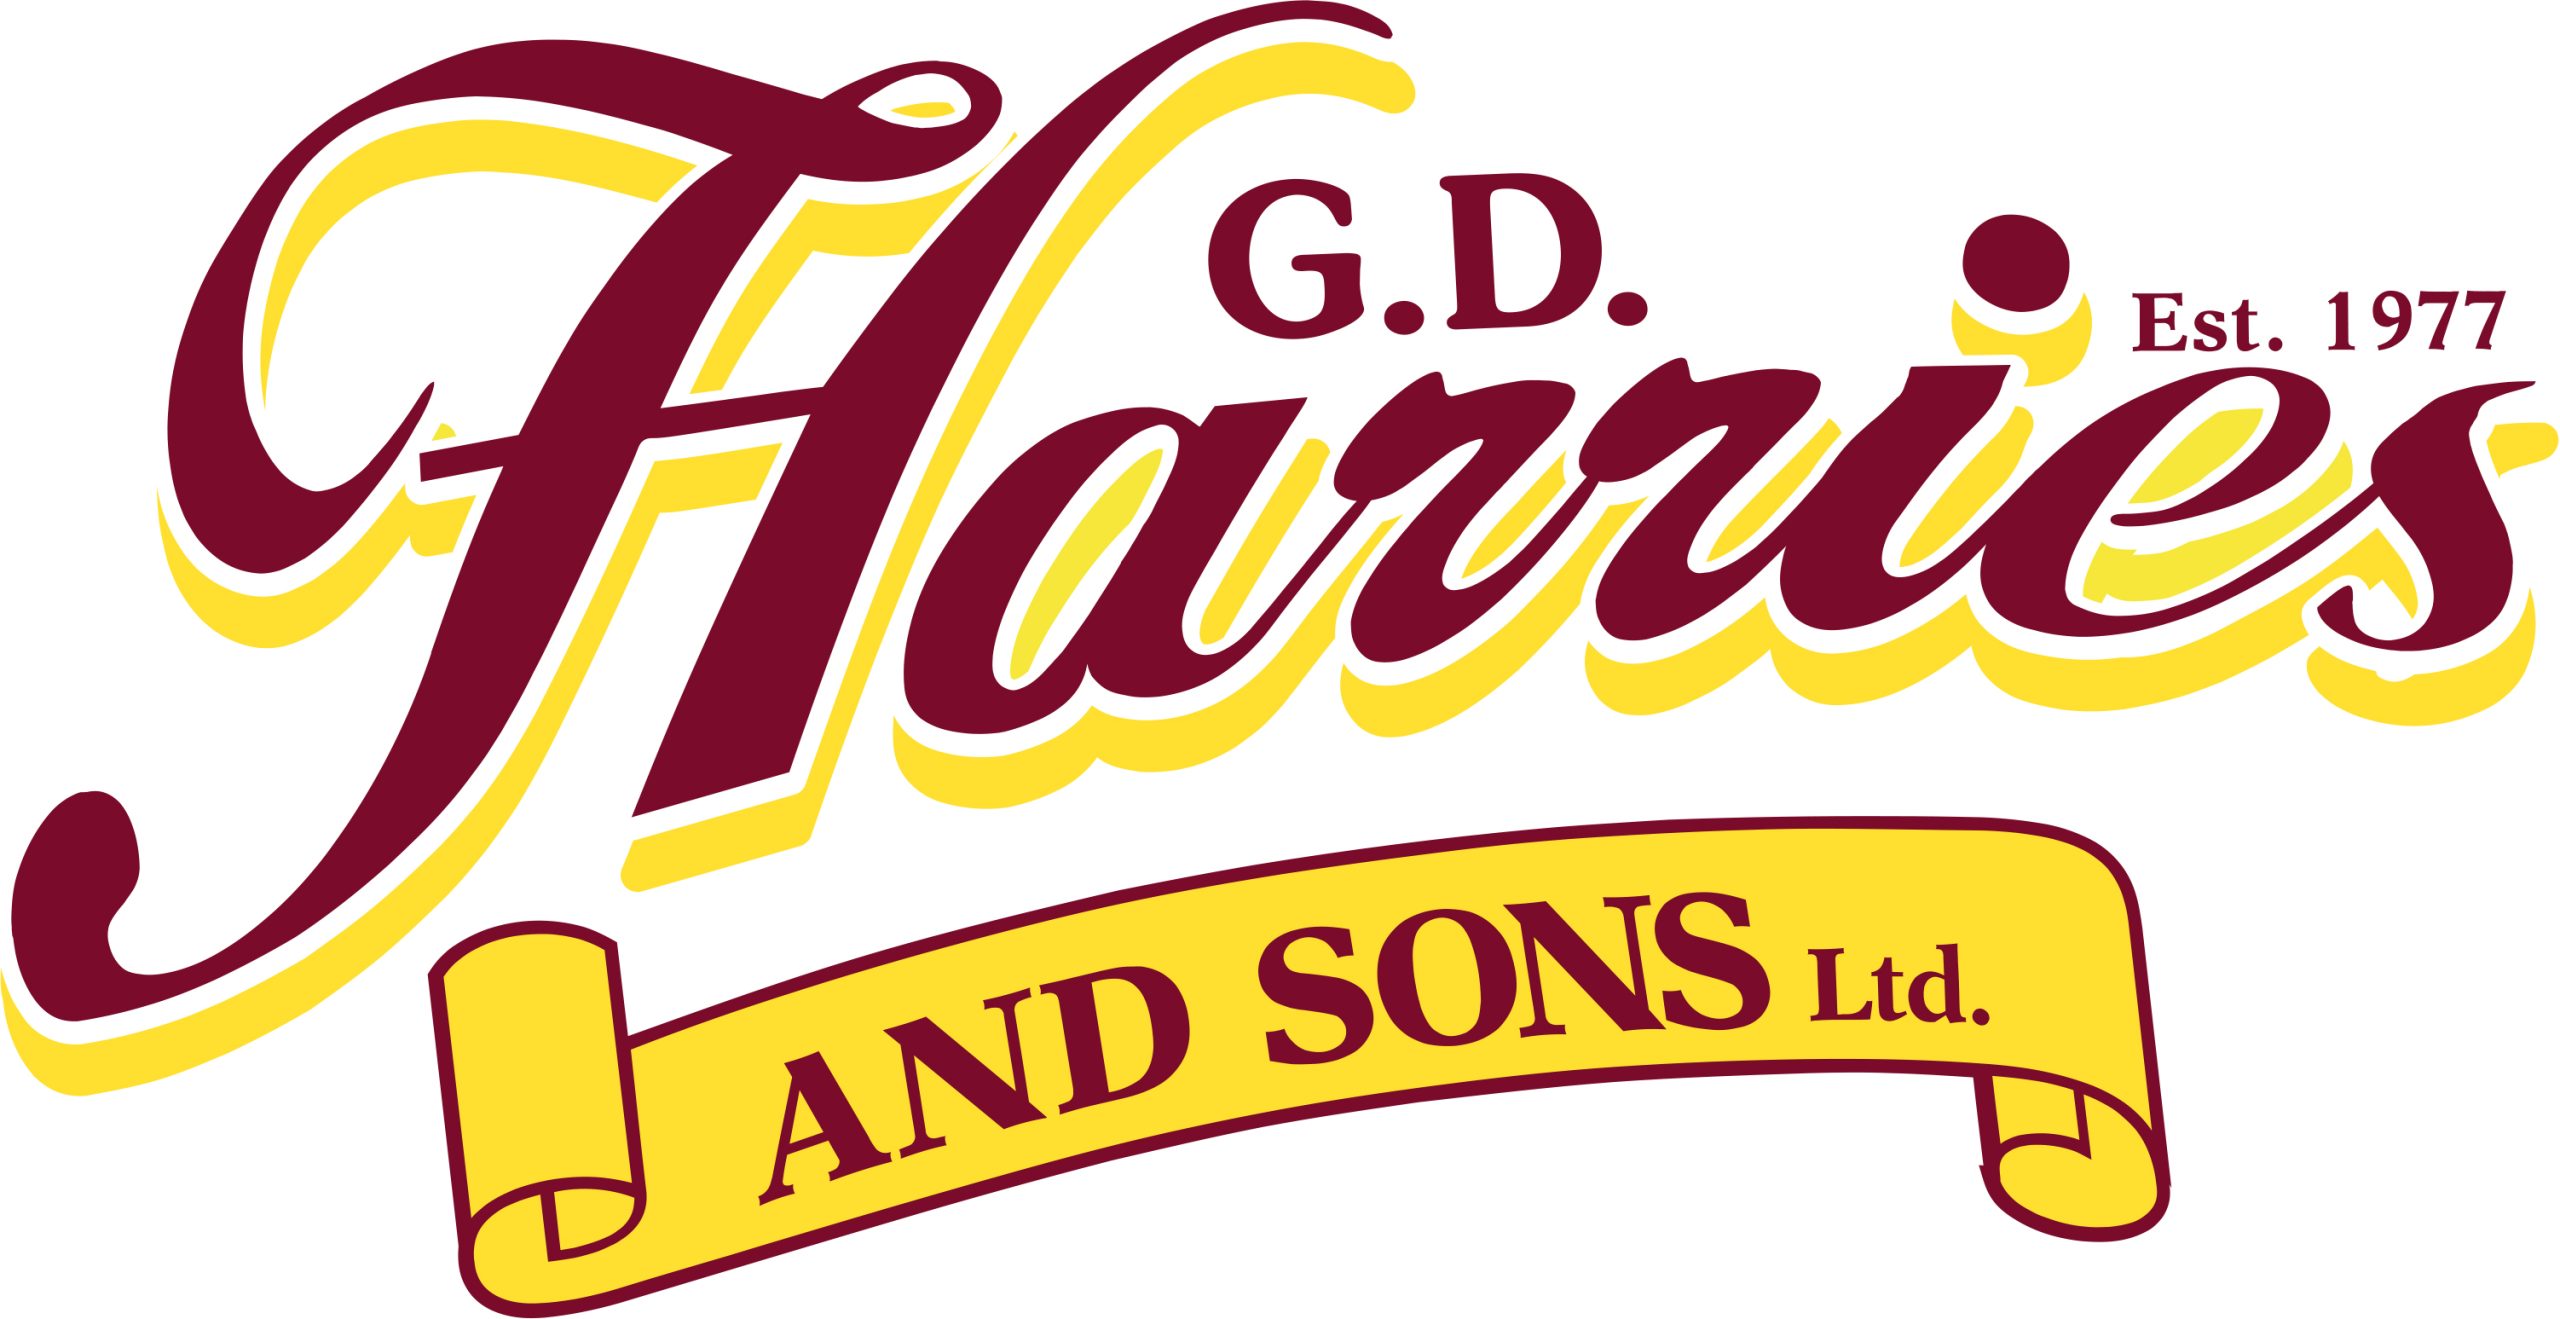 G.D Harries & Sons confirms support of Bravery Award